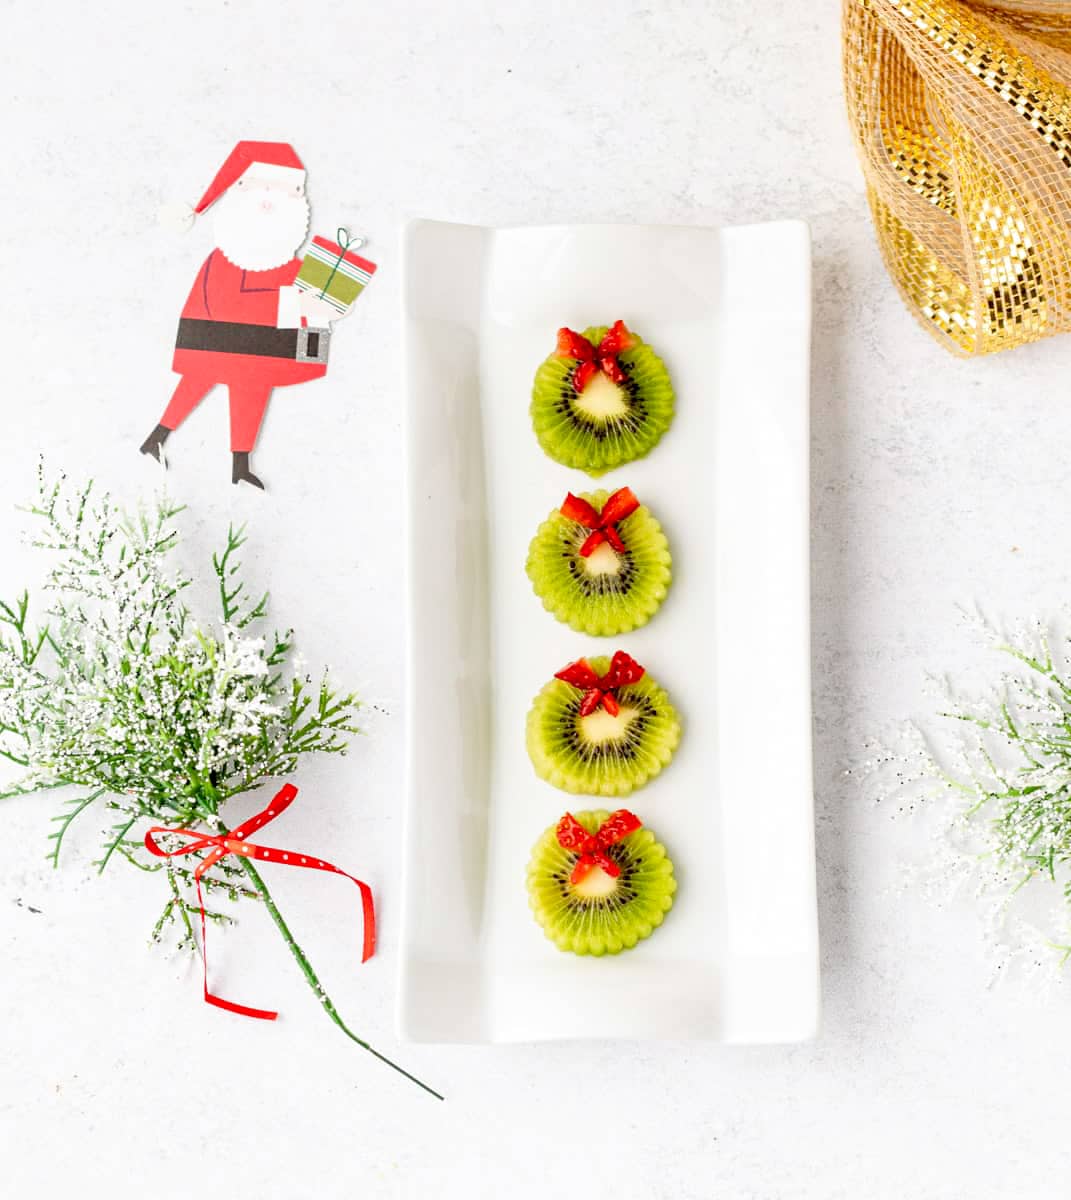 Four kiwi wreaths on a decorative white platter, surrounded by festive holiday decorations.